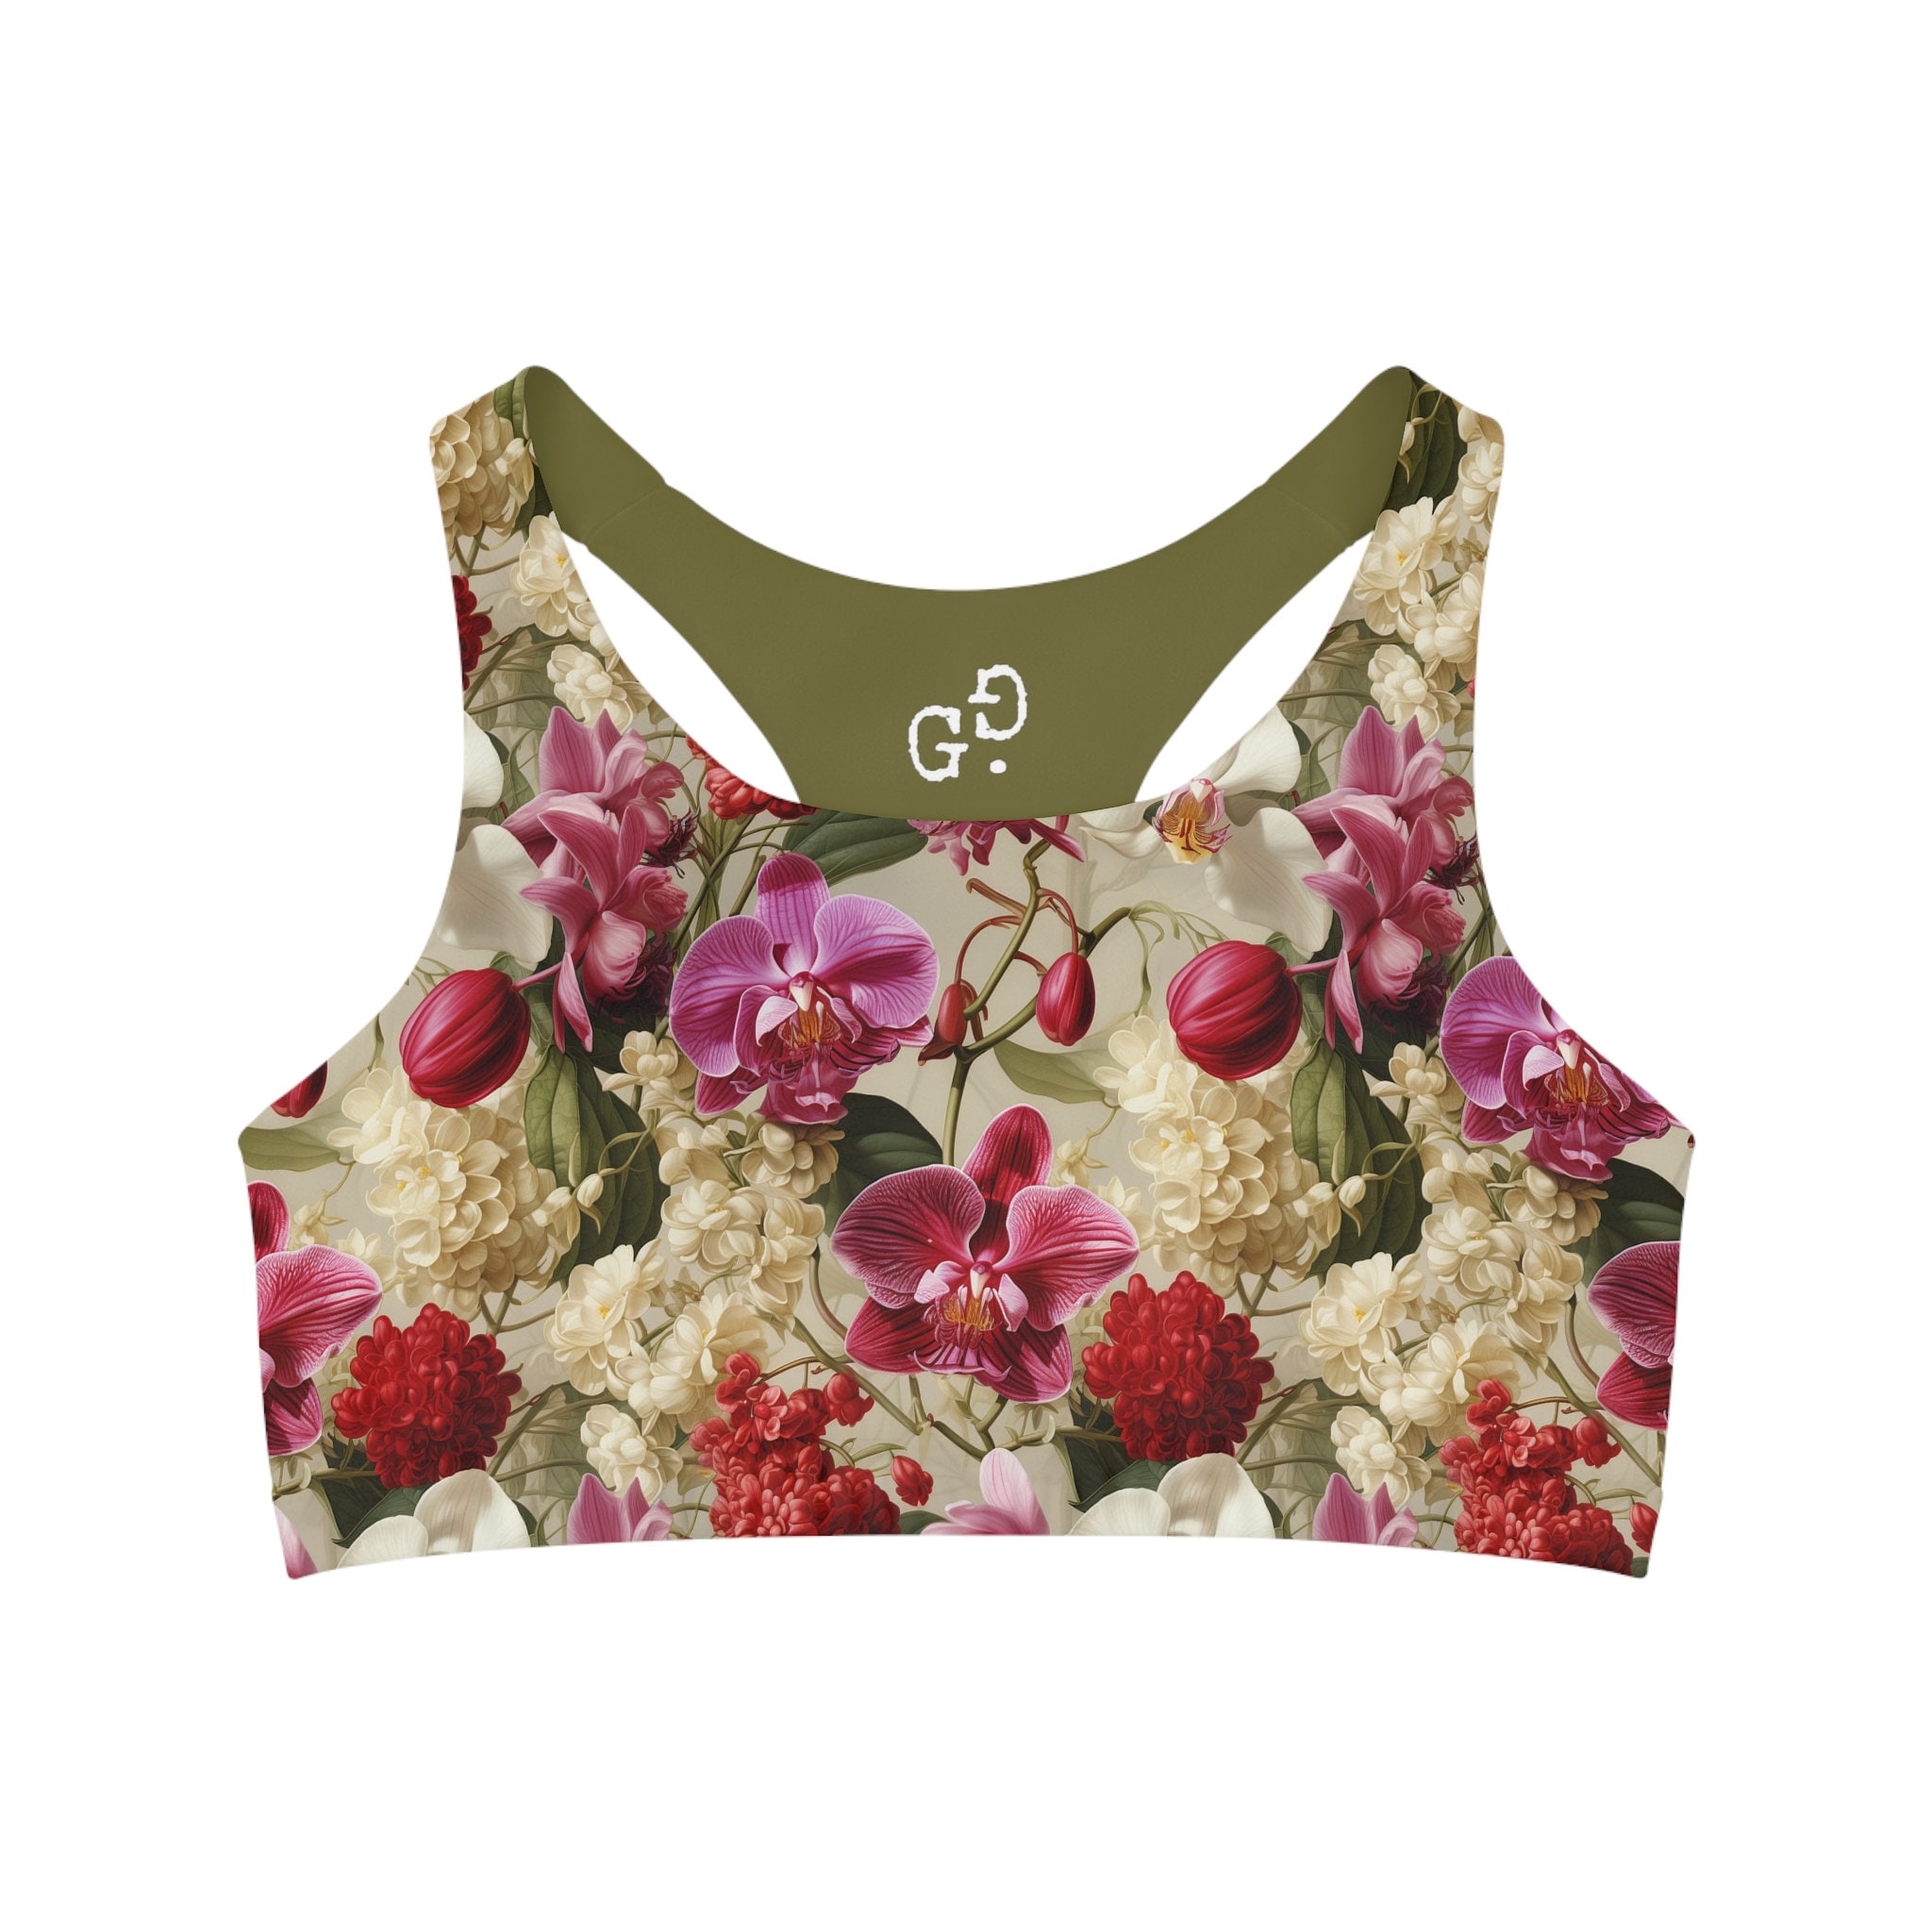 Floral Sports Bra, Purple, Red and White Orchids, Seamless, Comfortable,  Exclusive Design by Goodgrace, Designer Bra -  Norway